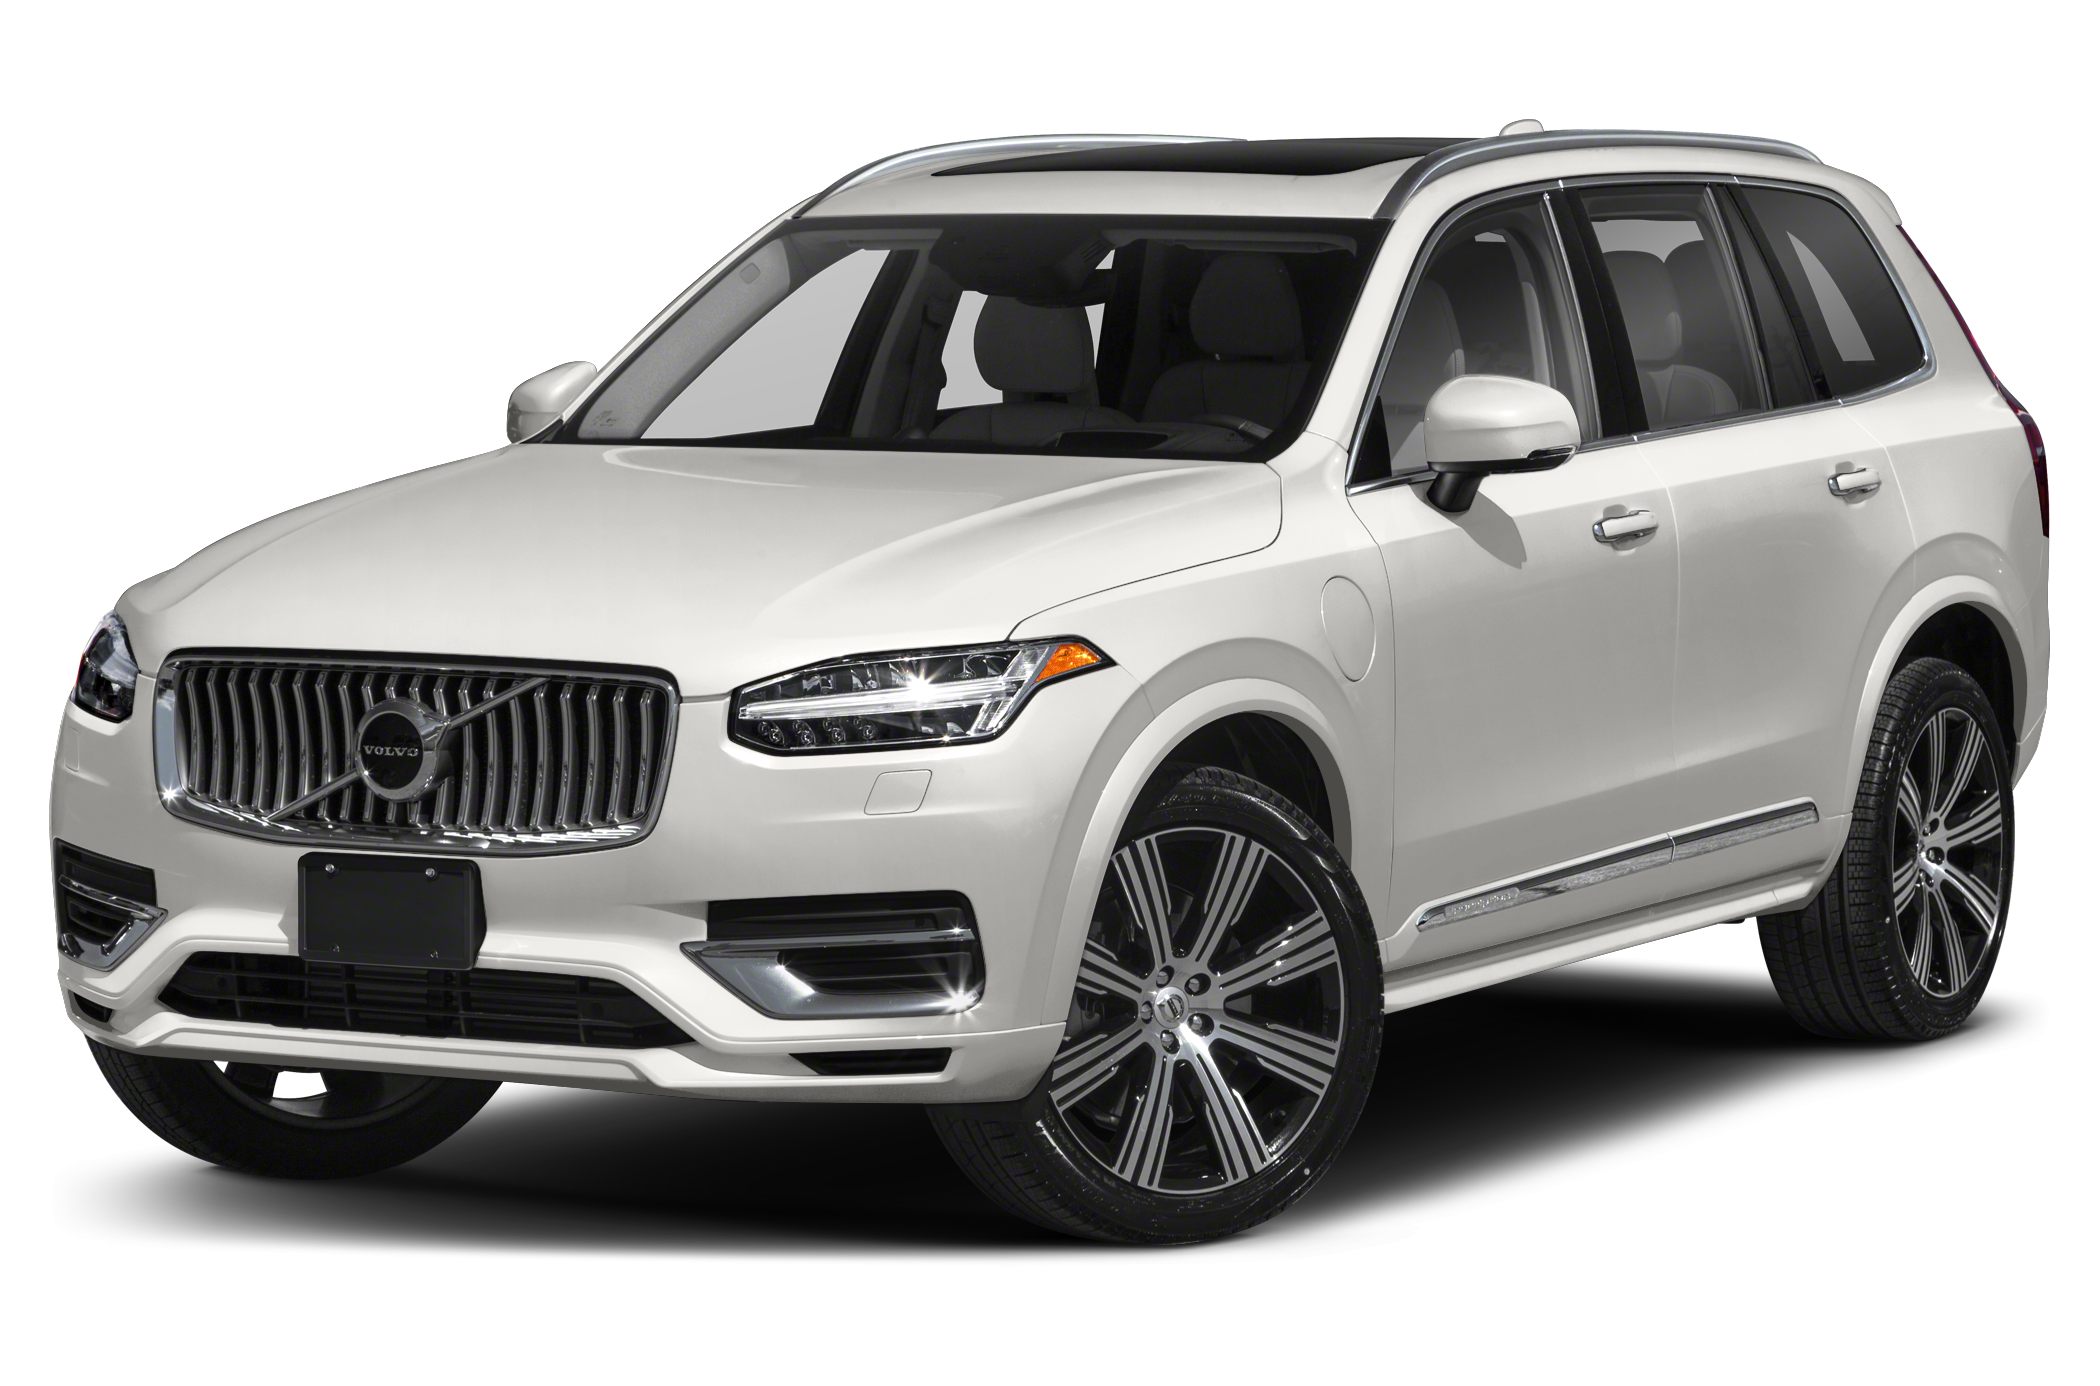 2020 Volvo XC90 T8 Inscription First Drive Review | Impressions, specs ...